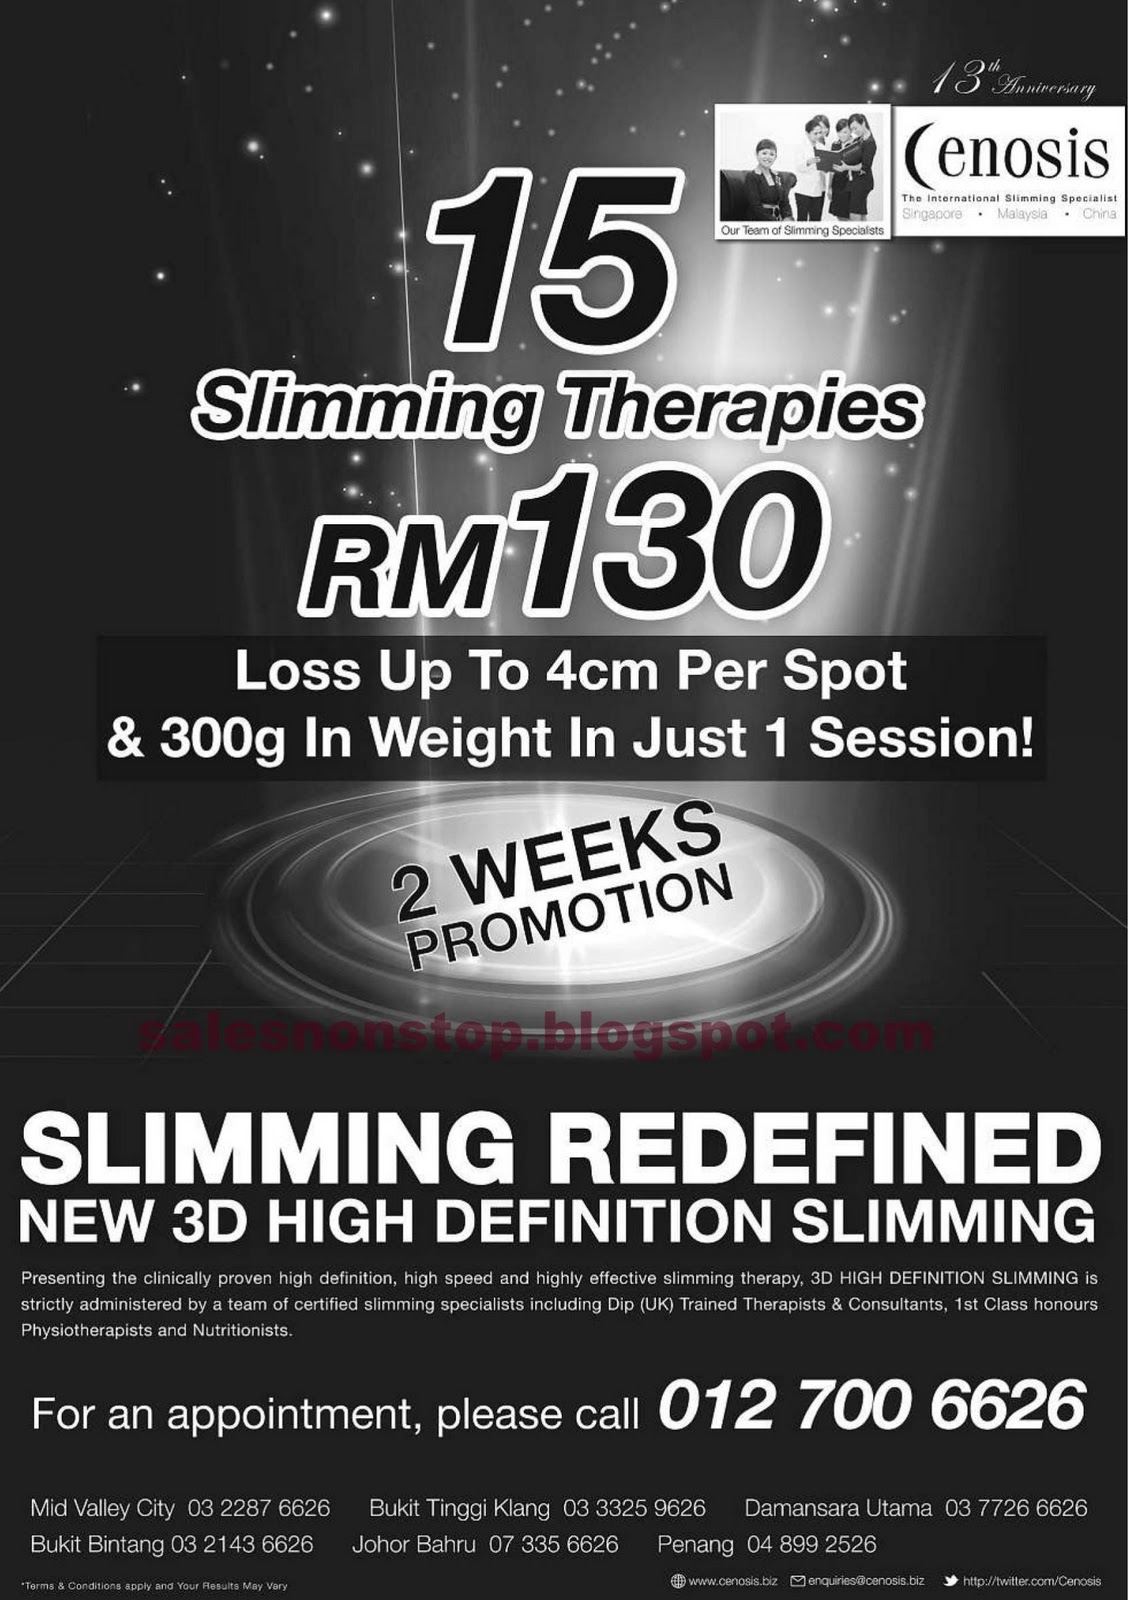 CENOSIS Slimming Therapies Promotion Offer | Sales nonstop